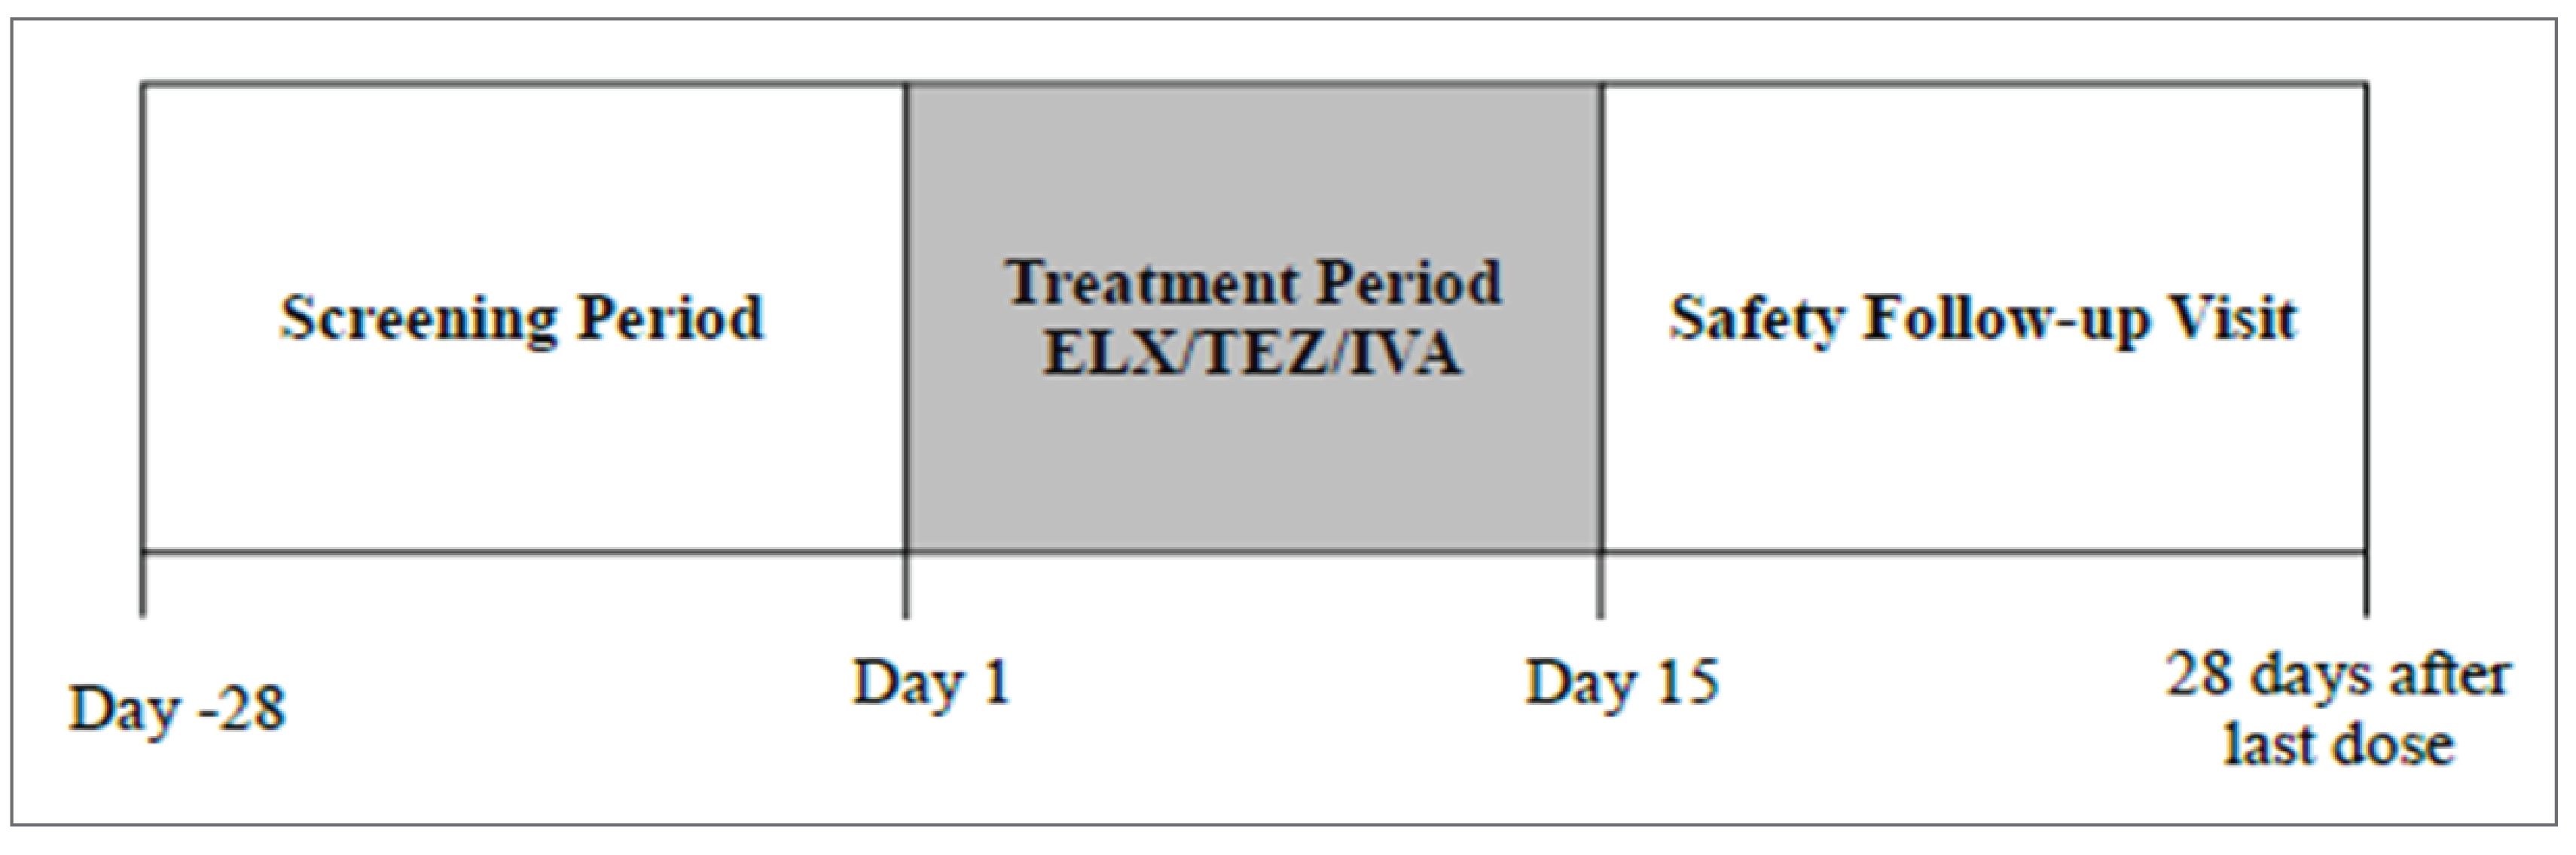 Part A of Study 111 includes a 28-day screening period then a 15-day treatment period with ELX-TEZ-IVA followed by a safety follow-up visit 28 days after last dose.